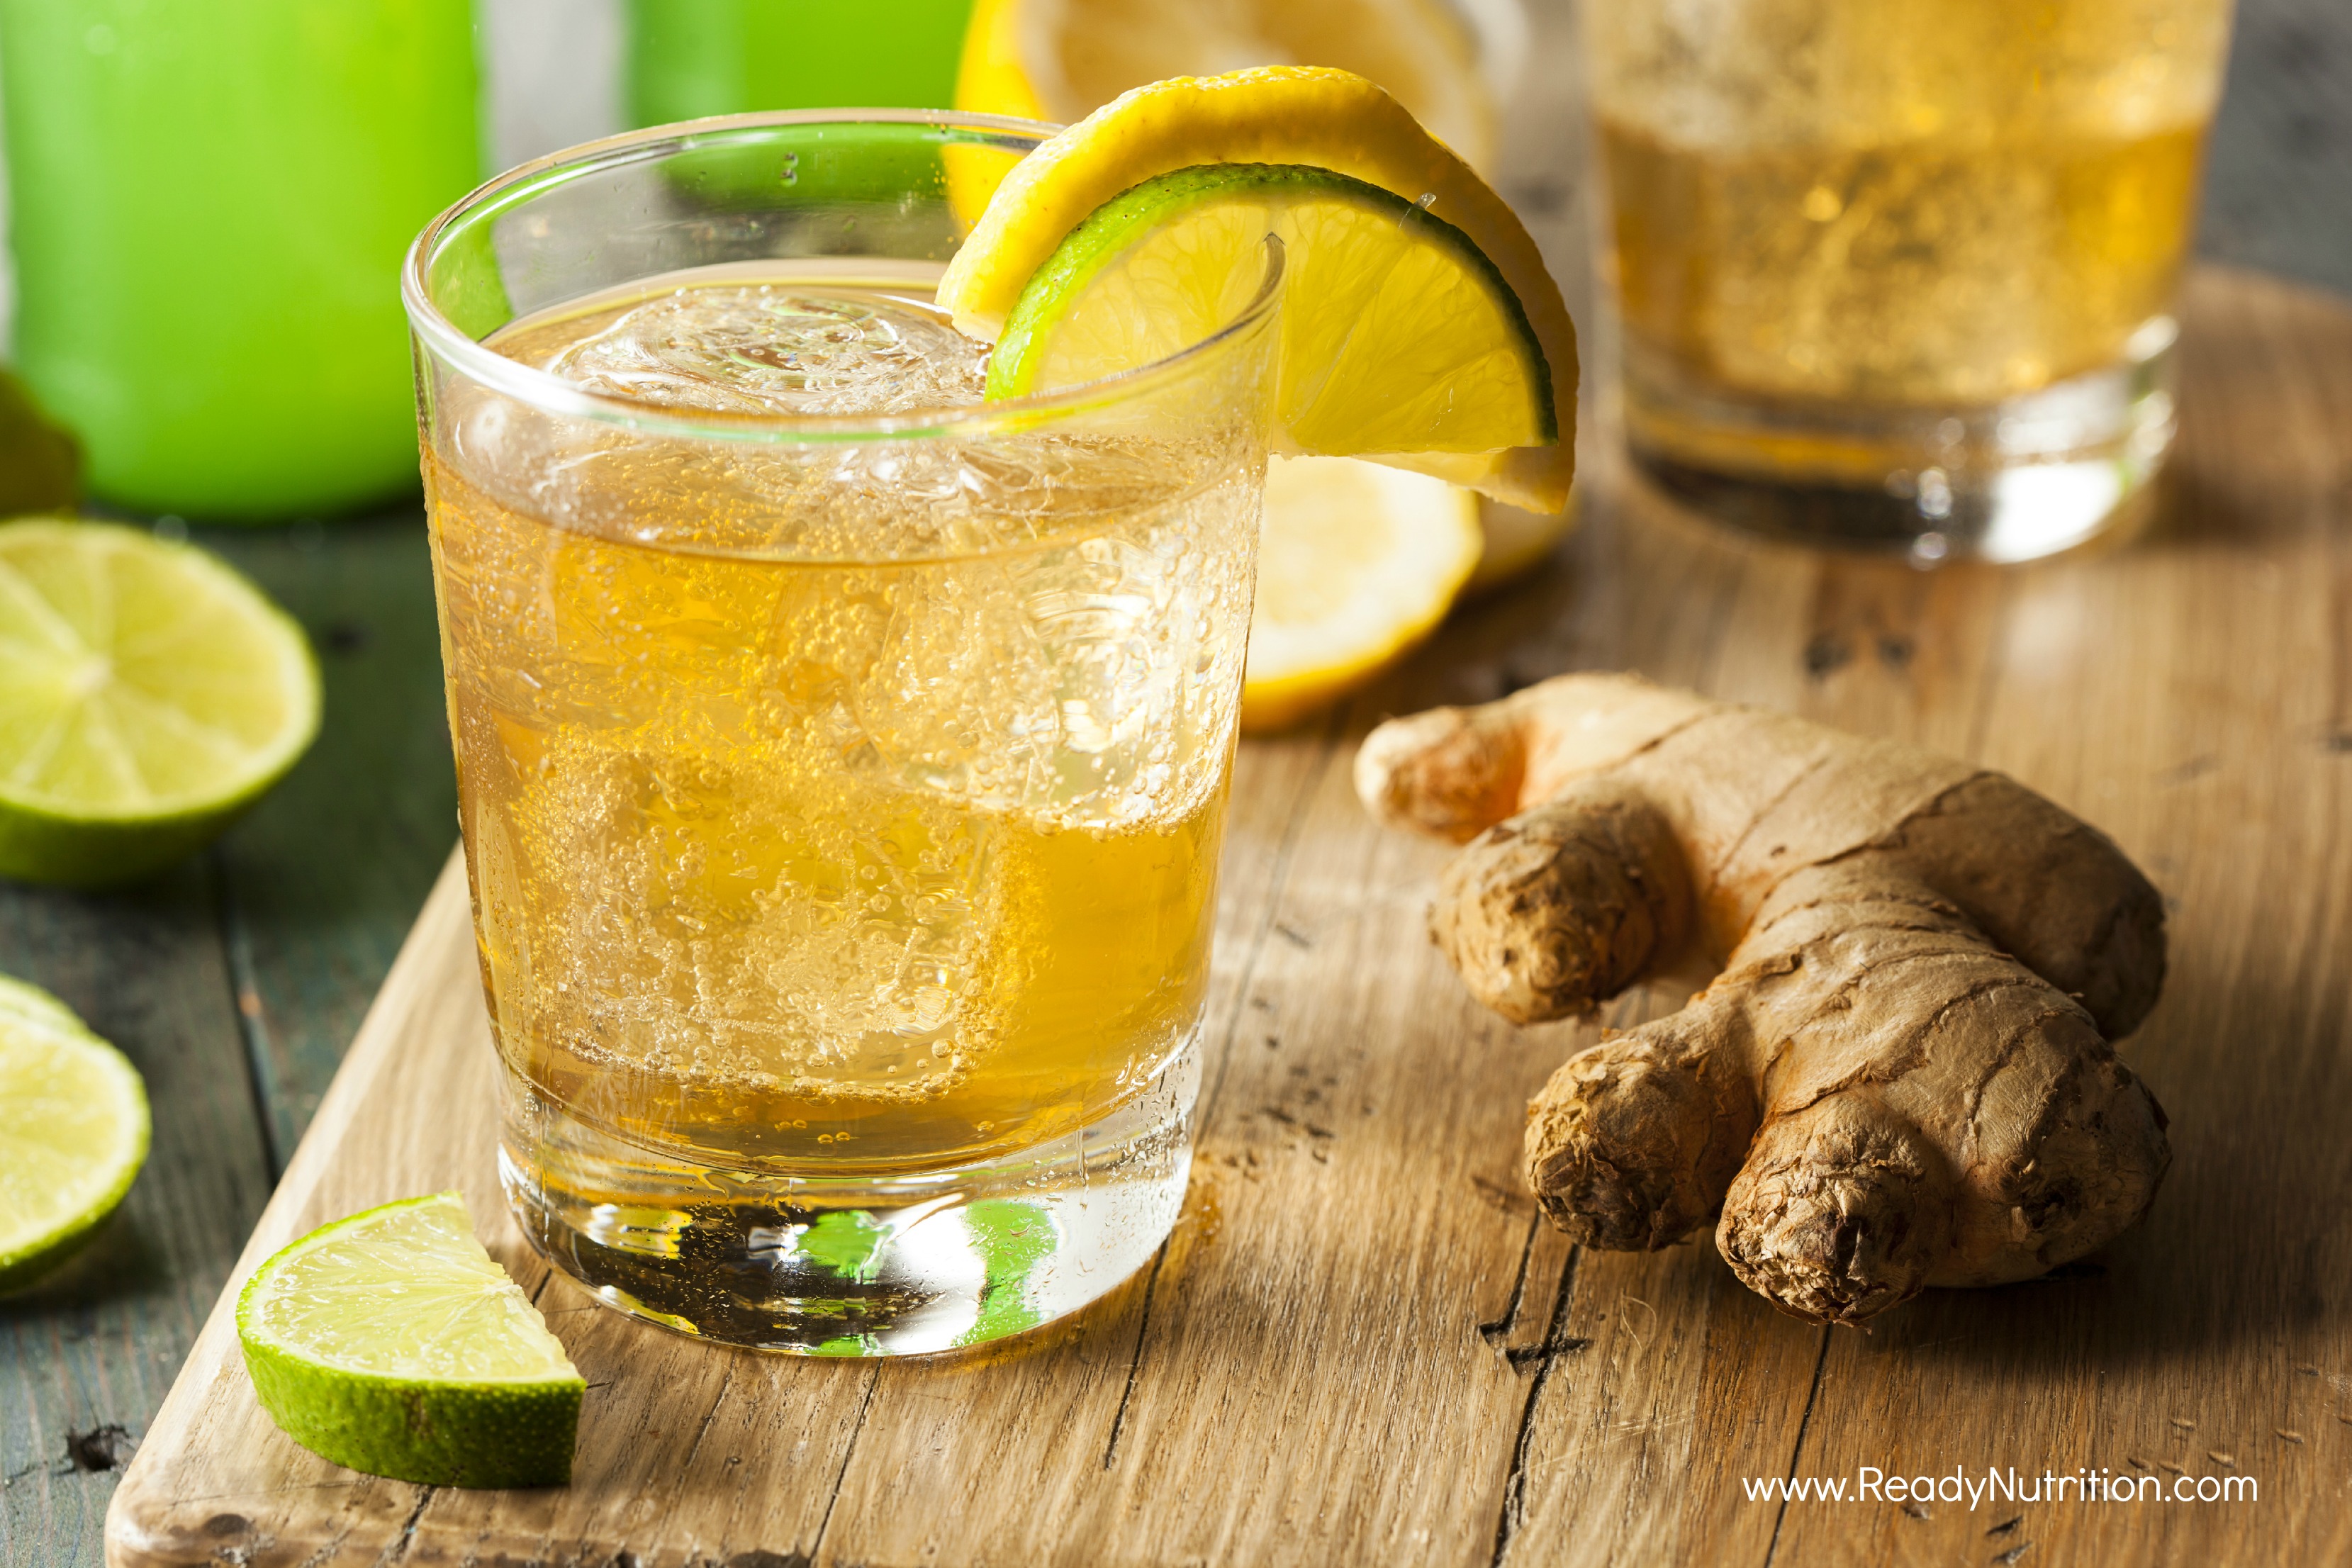 How to Make All Natural Homemade Ginger-Ale